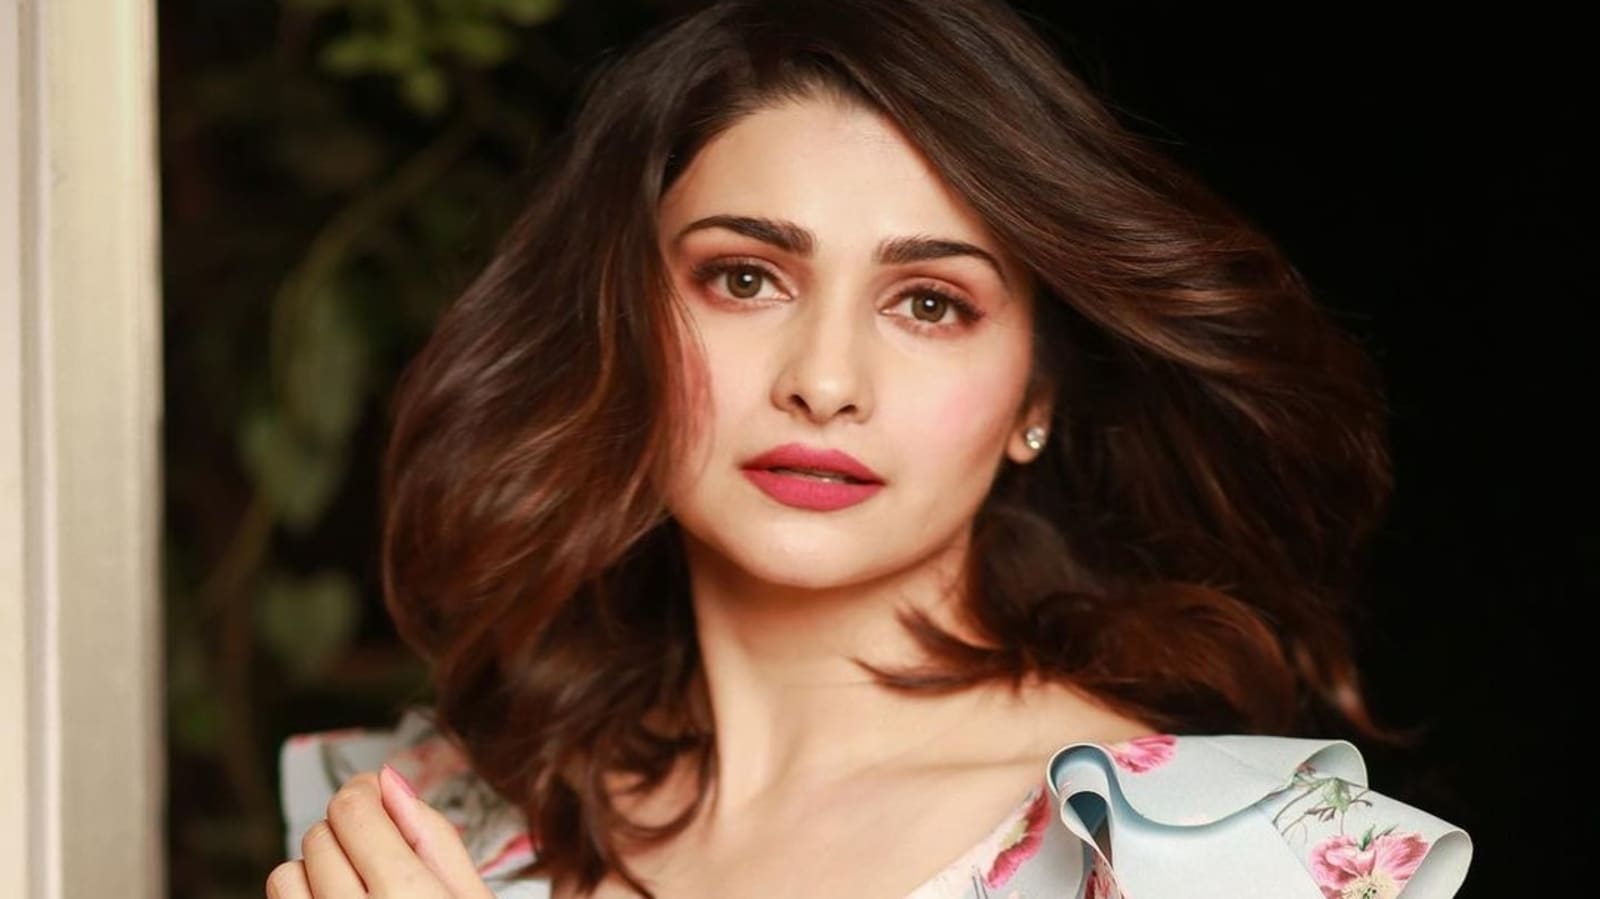 Prachi Desai admits that her career has suffered from nepotism and calls it “a reality that is best accepted”.